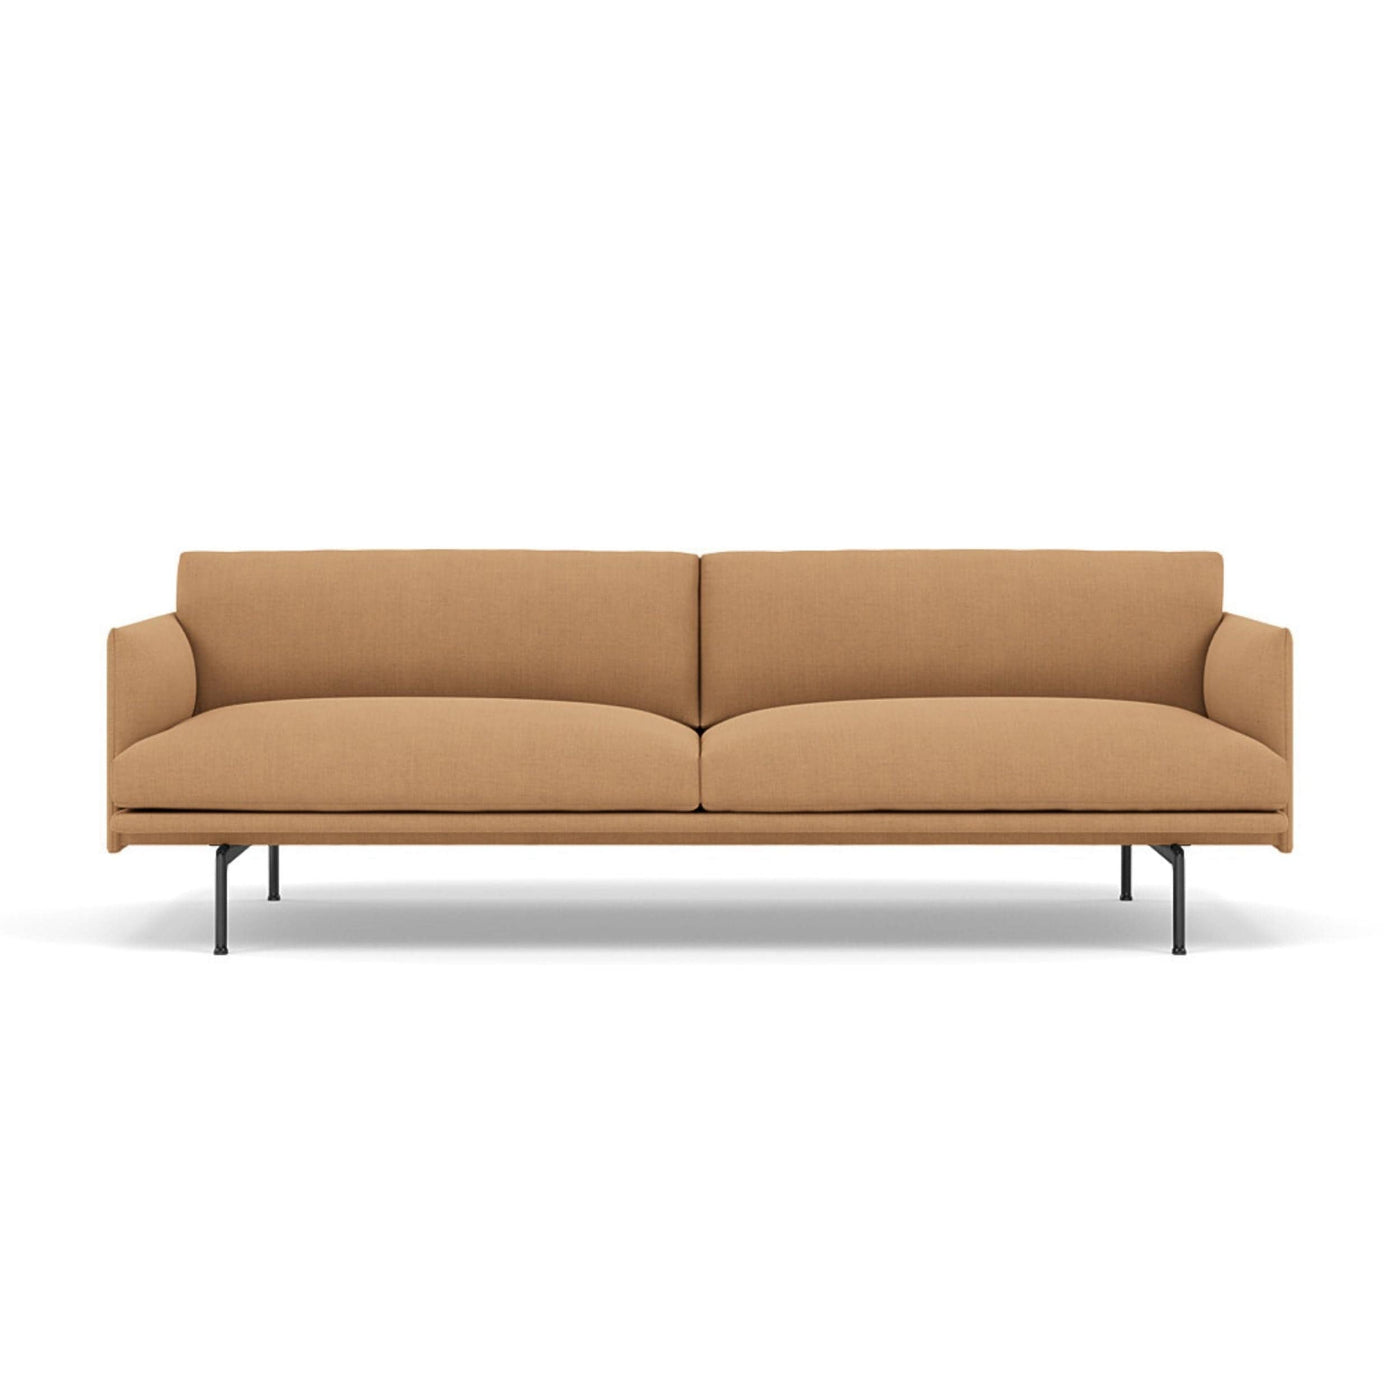 Muuto Outline 3 seater sofa with black legs. Available from someday designs. #colour_fiord-451